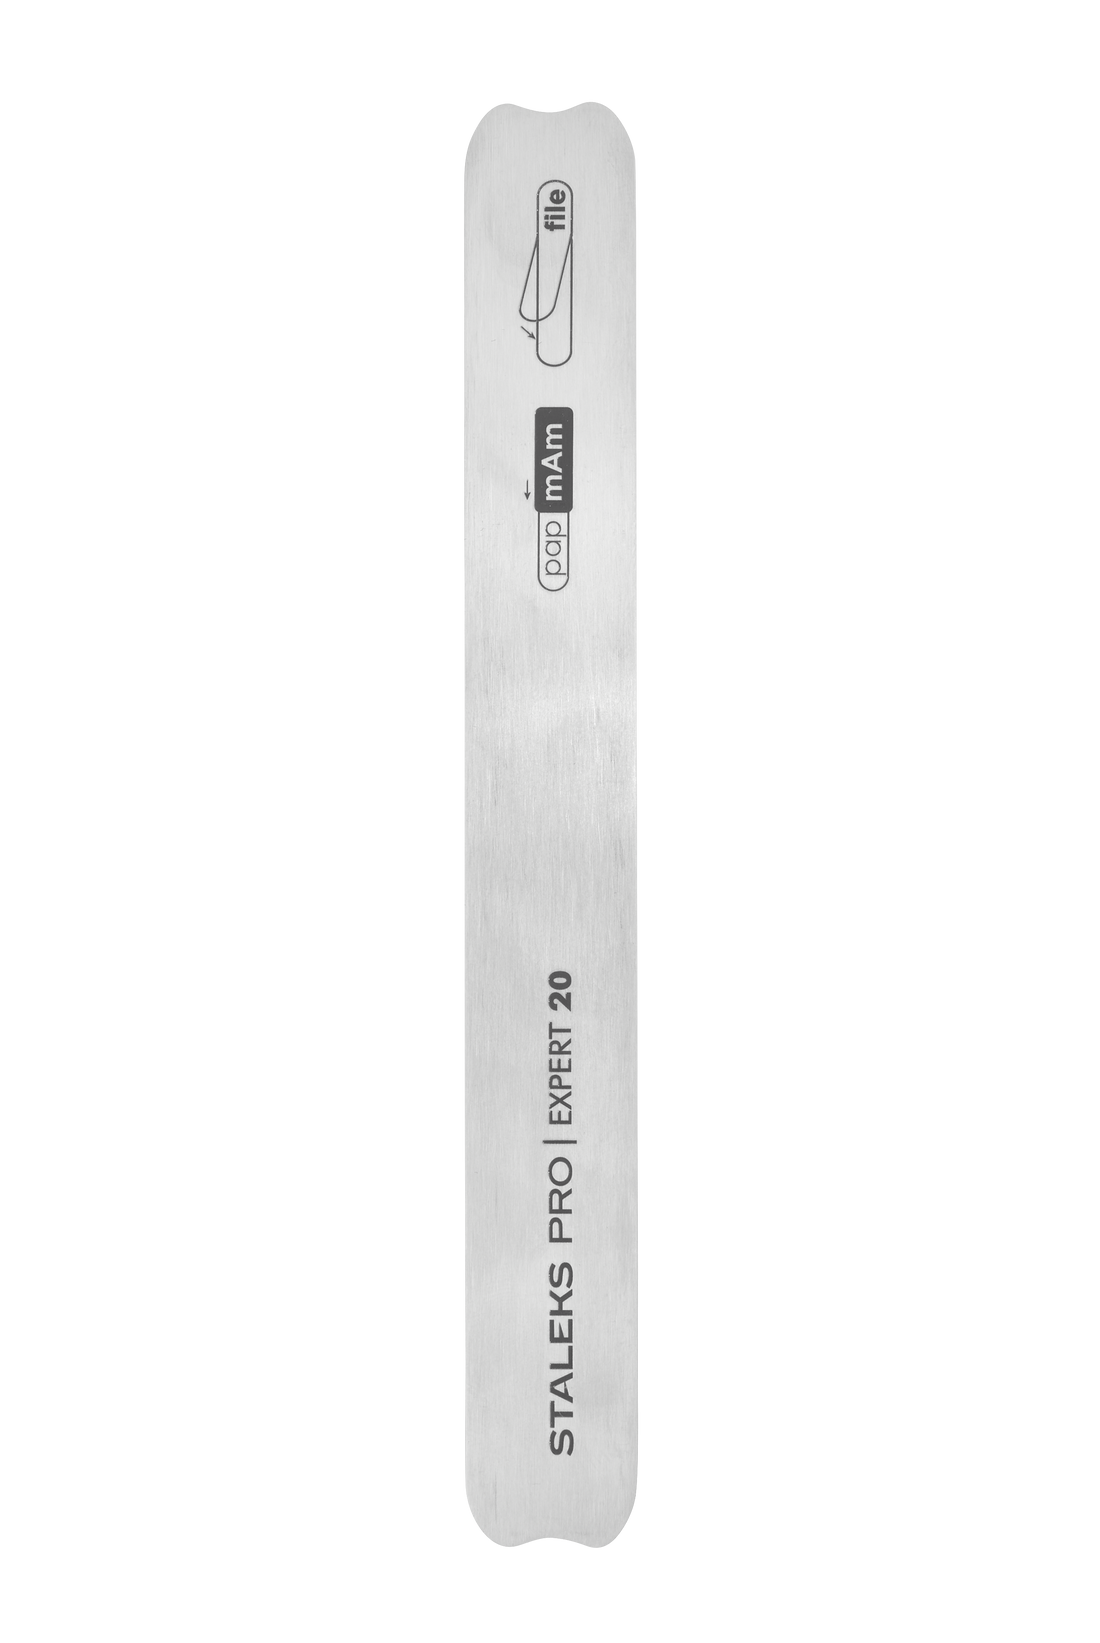 Nail file metal straight (base) EXPERT 20 complete with replaceable file-cover 180 grit Staleks